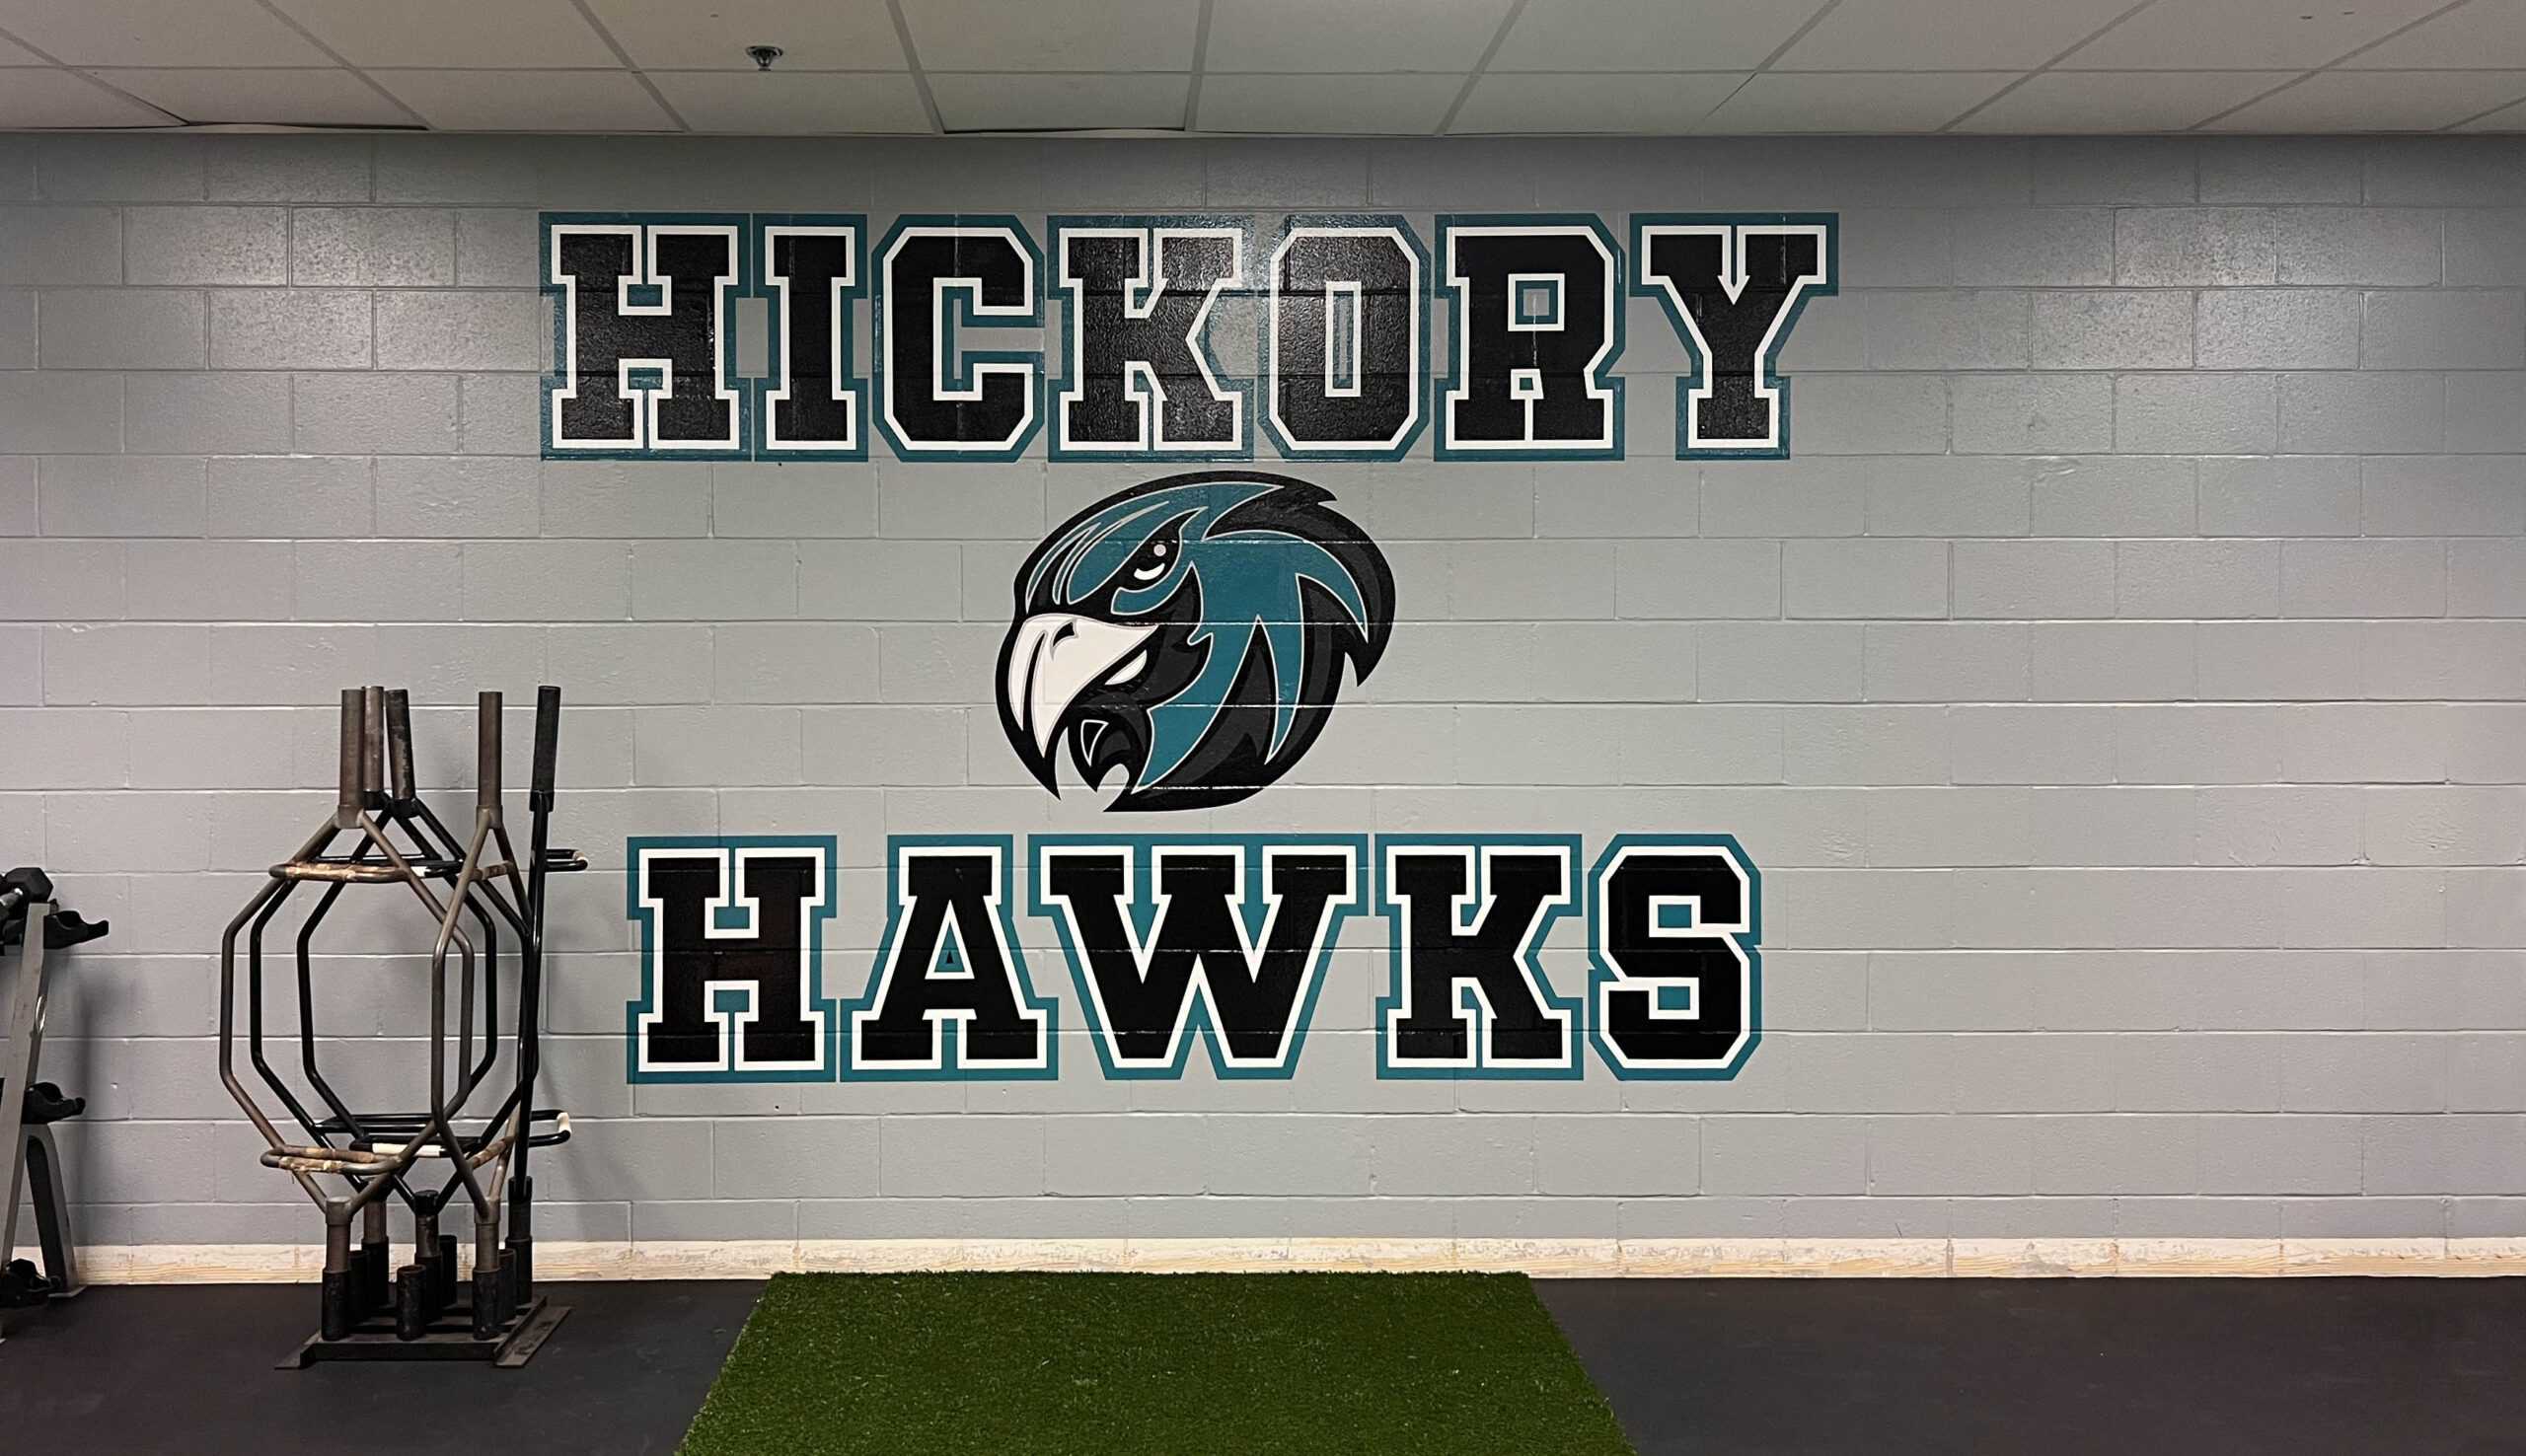 School wall graphics - We design and install graphics on Walls, Buildings, Glass, Floors and more.